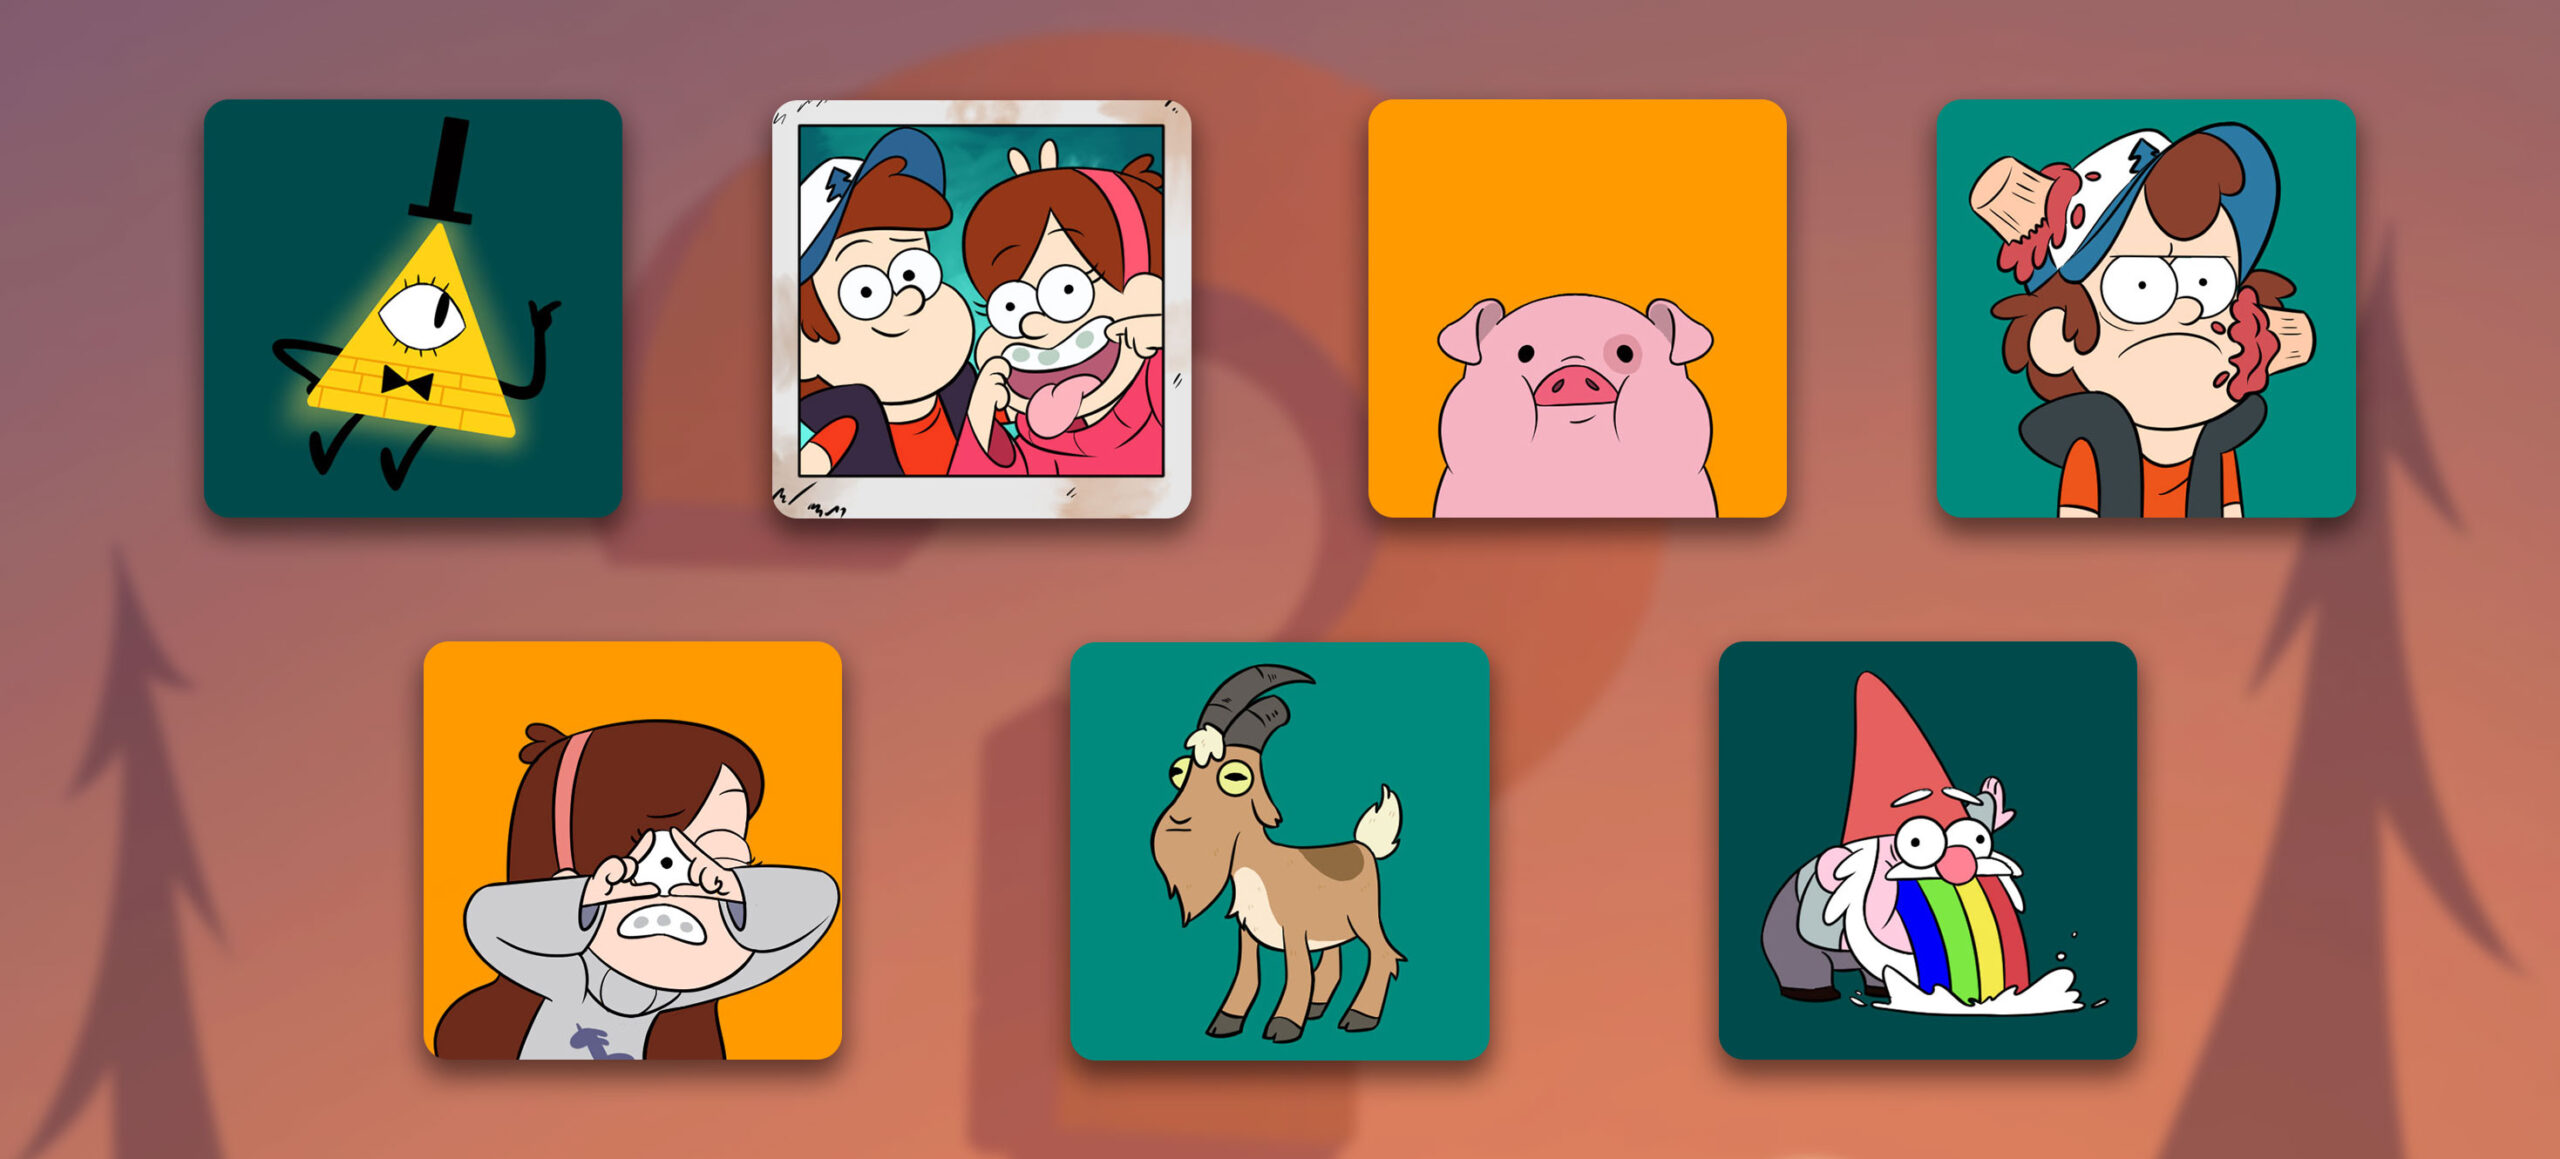 gravity falls widgets pack preview 5